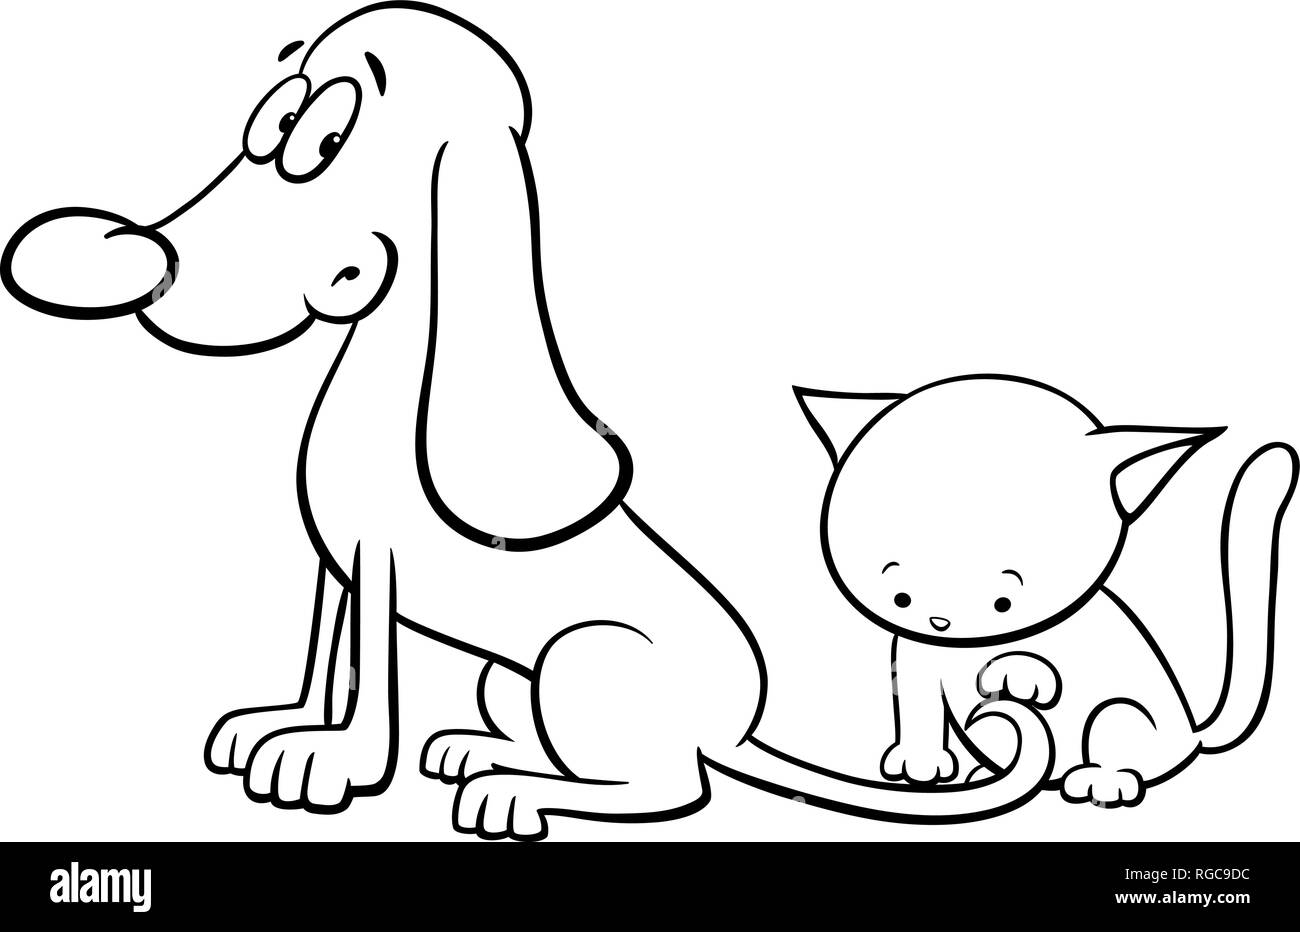 Black and White Cartoon Illustration of Dog and Cute Little Kitten Pet Animal Characters Coloring Book Stock Vector